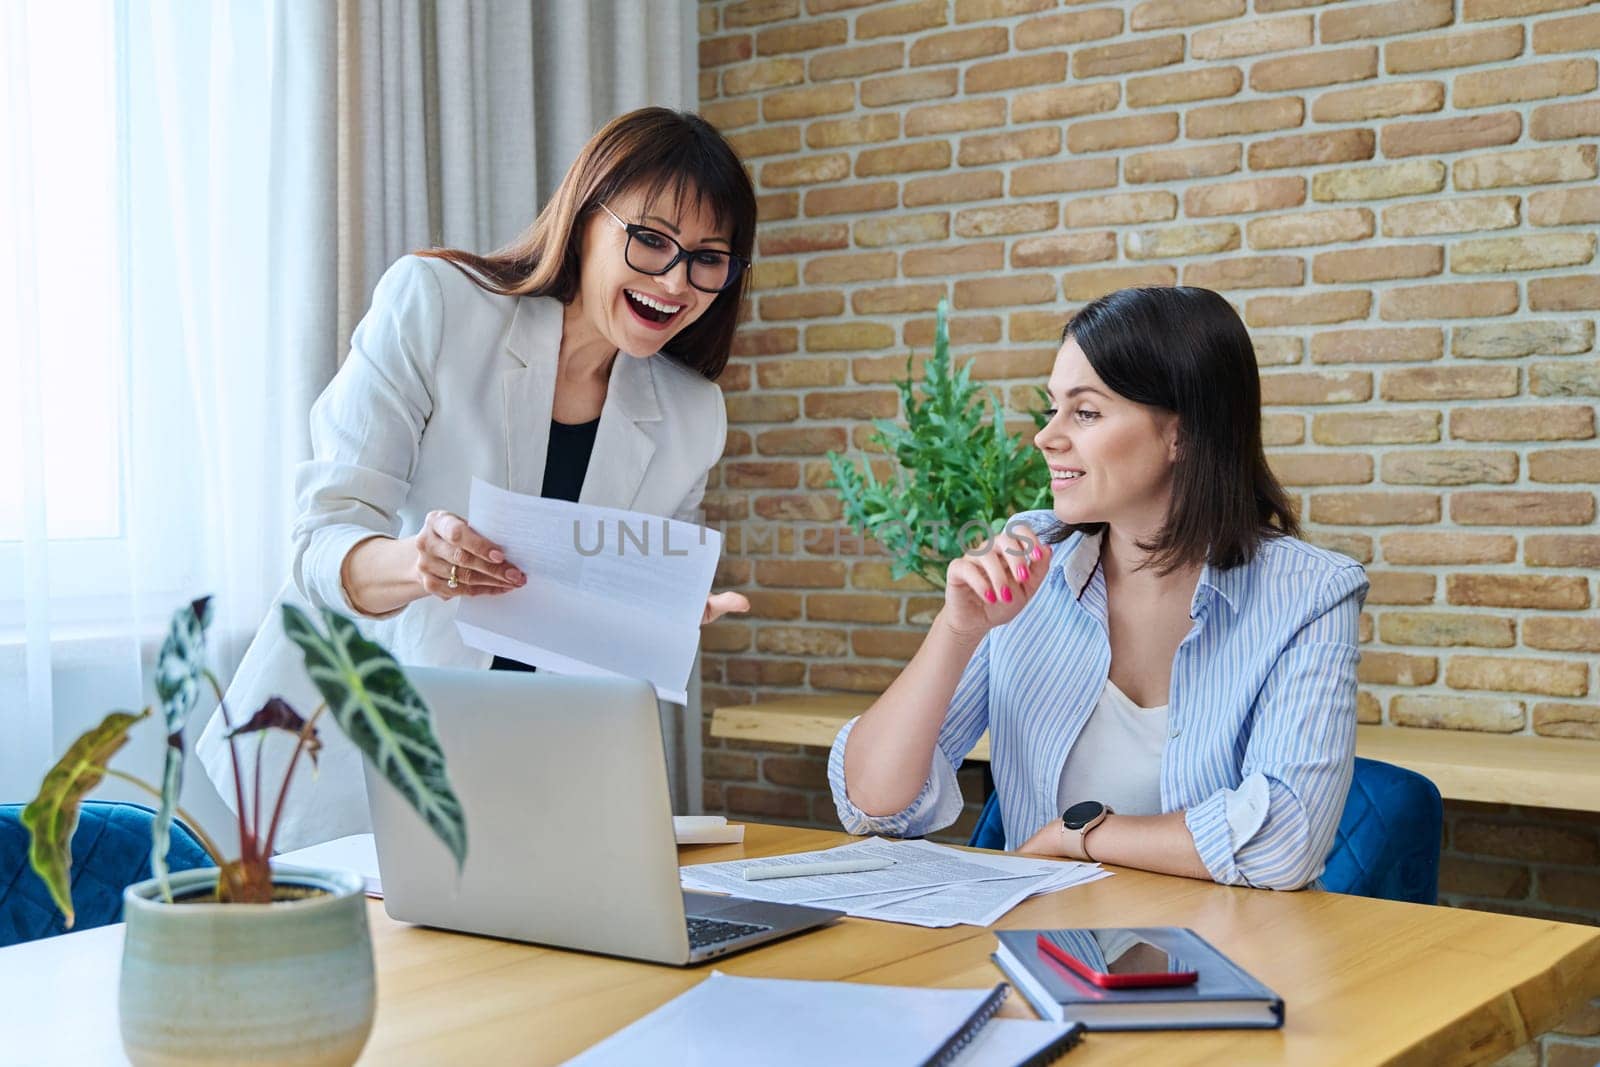 Two joyful happy smiling business women colleagues sitting at large table in office with business papers contracts. Business ceo work law finance mentoring consulting teamwork people job concept